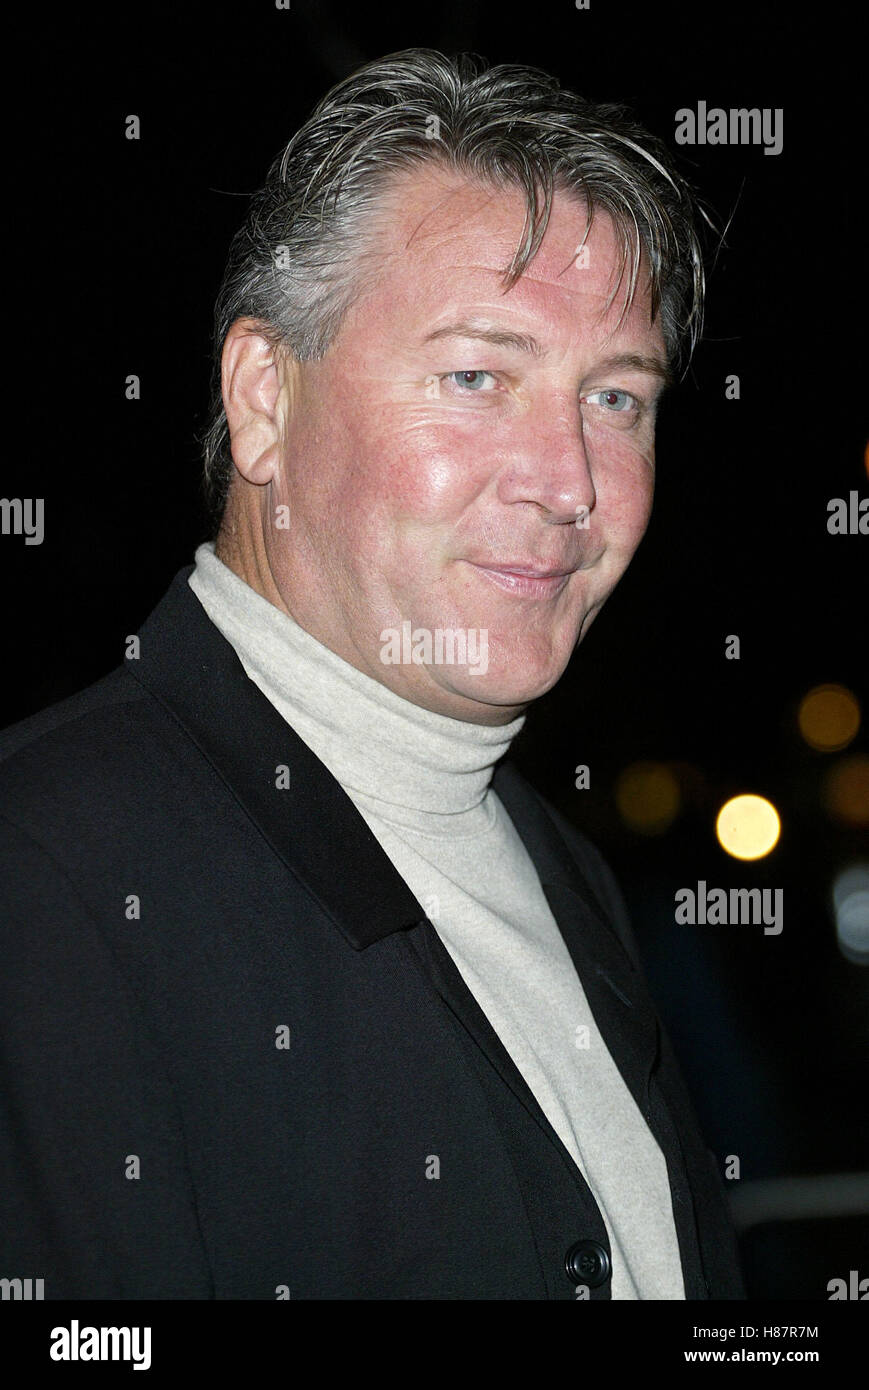 TOMMY WALSH PETER PAN PREMIERE EMPIRE LEICESTER SQUARE LONDON UK 09 December 2003 Stock Photo